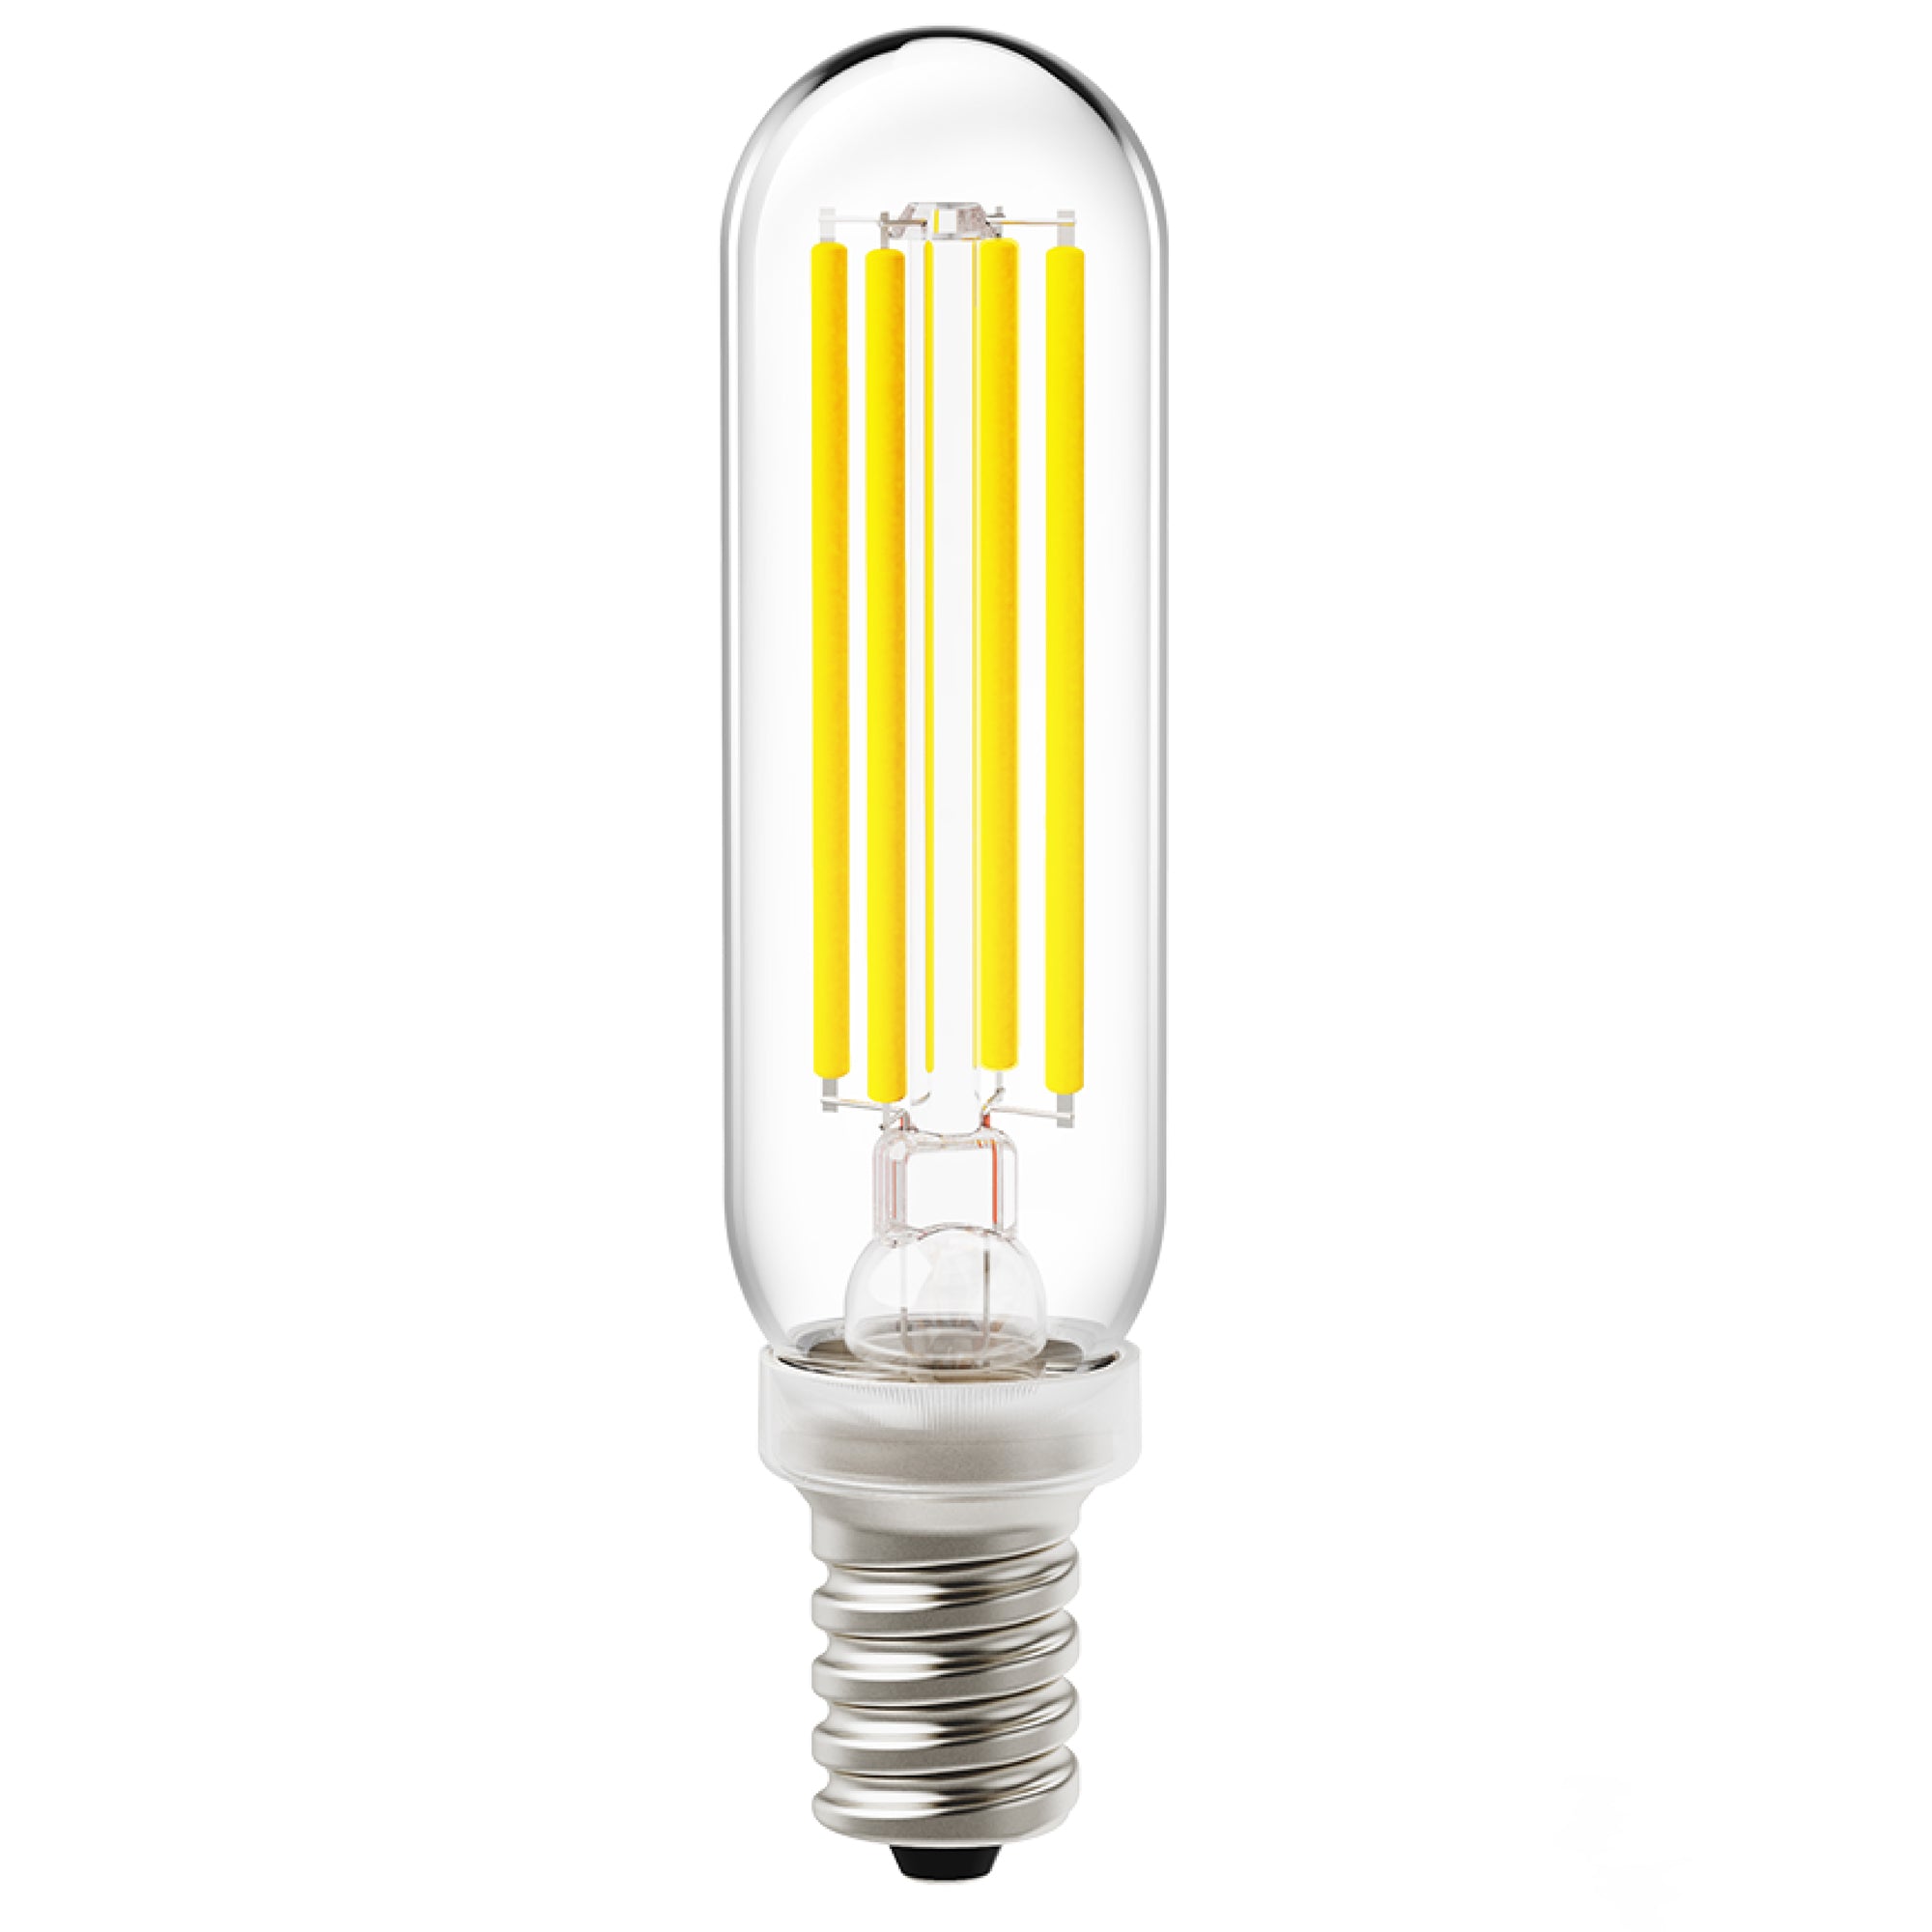 Create the retro look and feel of a bygone era with the dimmable Sunco T6 LED Filament Bulb. This wet rated light bulb is tubular in shape and ideal for pendant lamp fixtures where you can see the vintage styling and the LED Filament inside the glass bulb. This bulb features an E12 candelabra base for chandeliers, pendants, unique fixtures, and single bulb light fixtures.